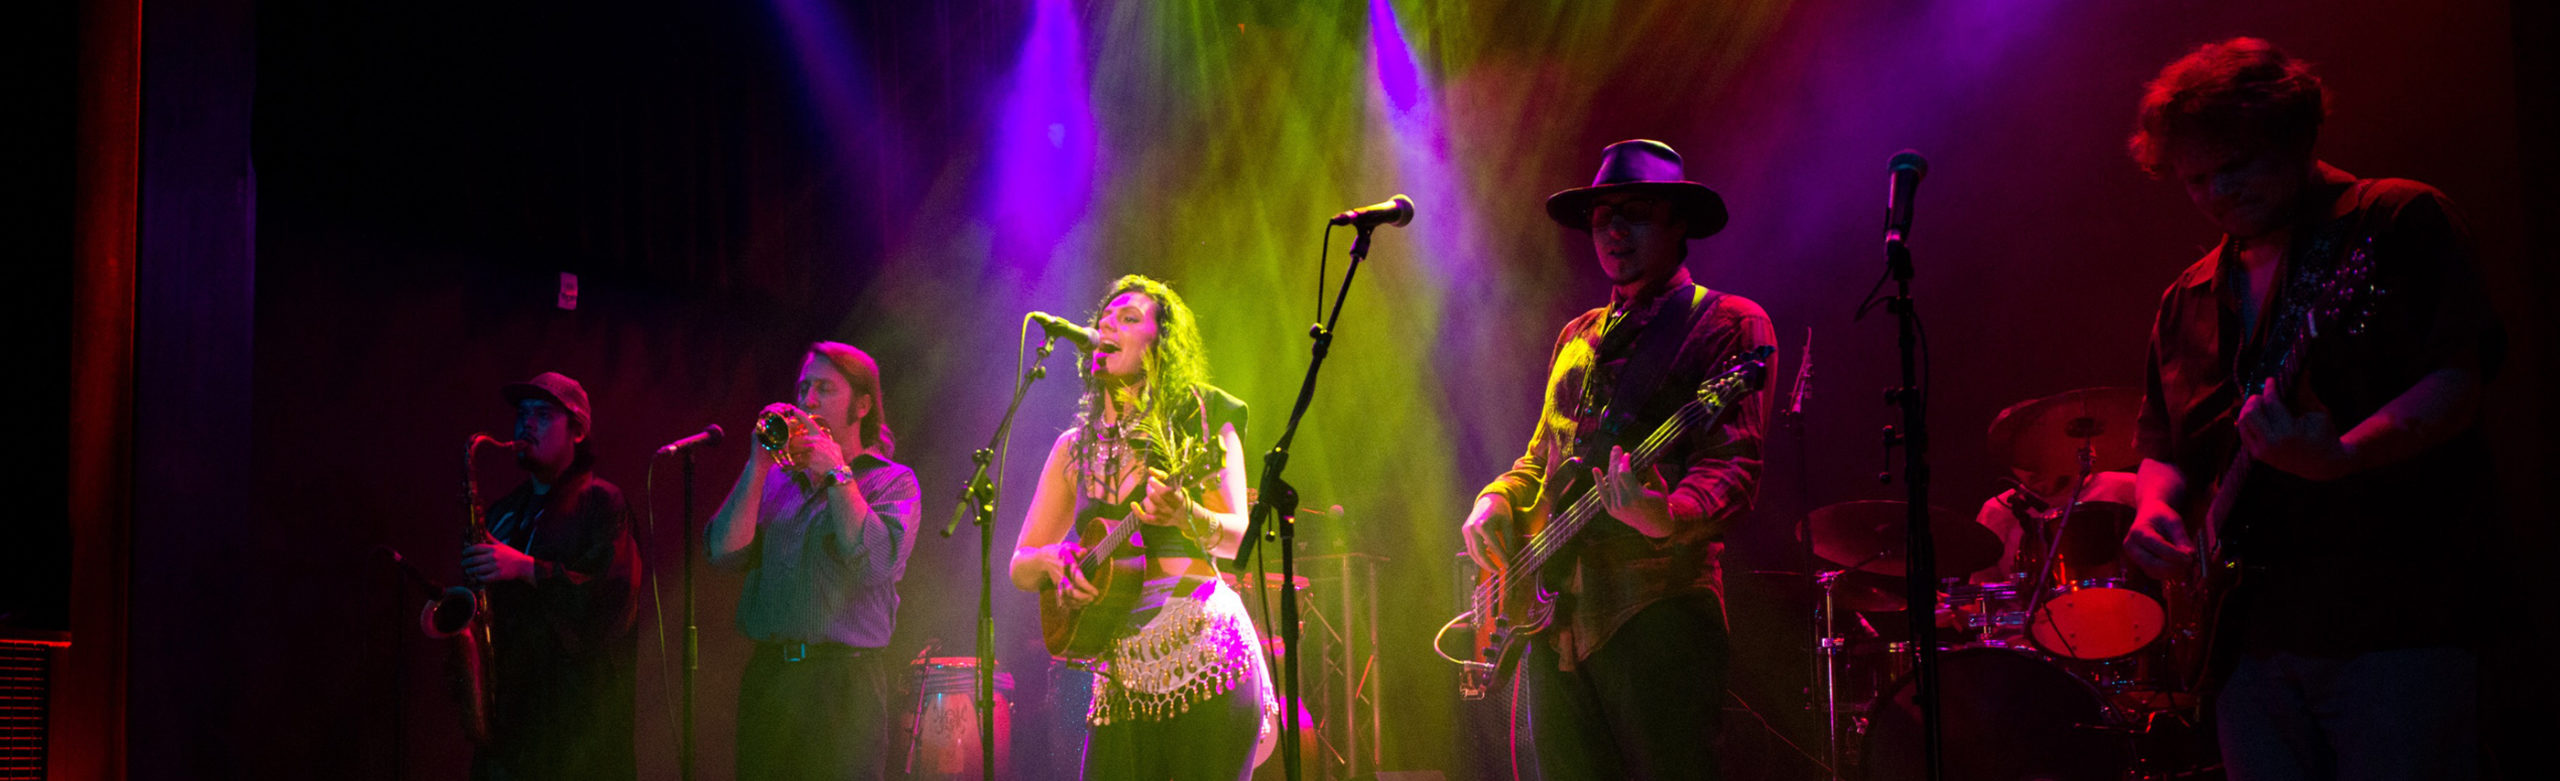 Q&A with Bozeman’s Mountain Reggae Band Cole & The Thornes Image